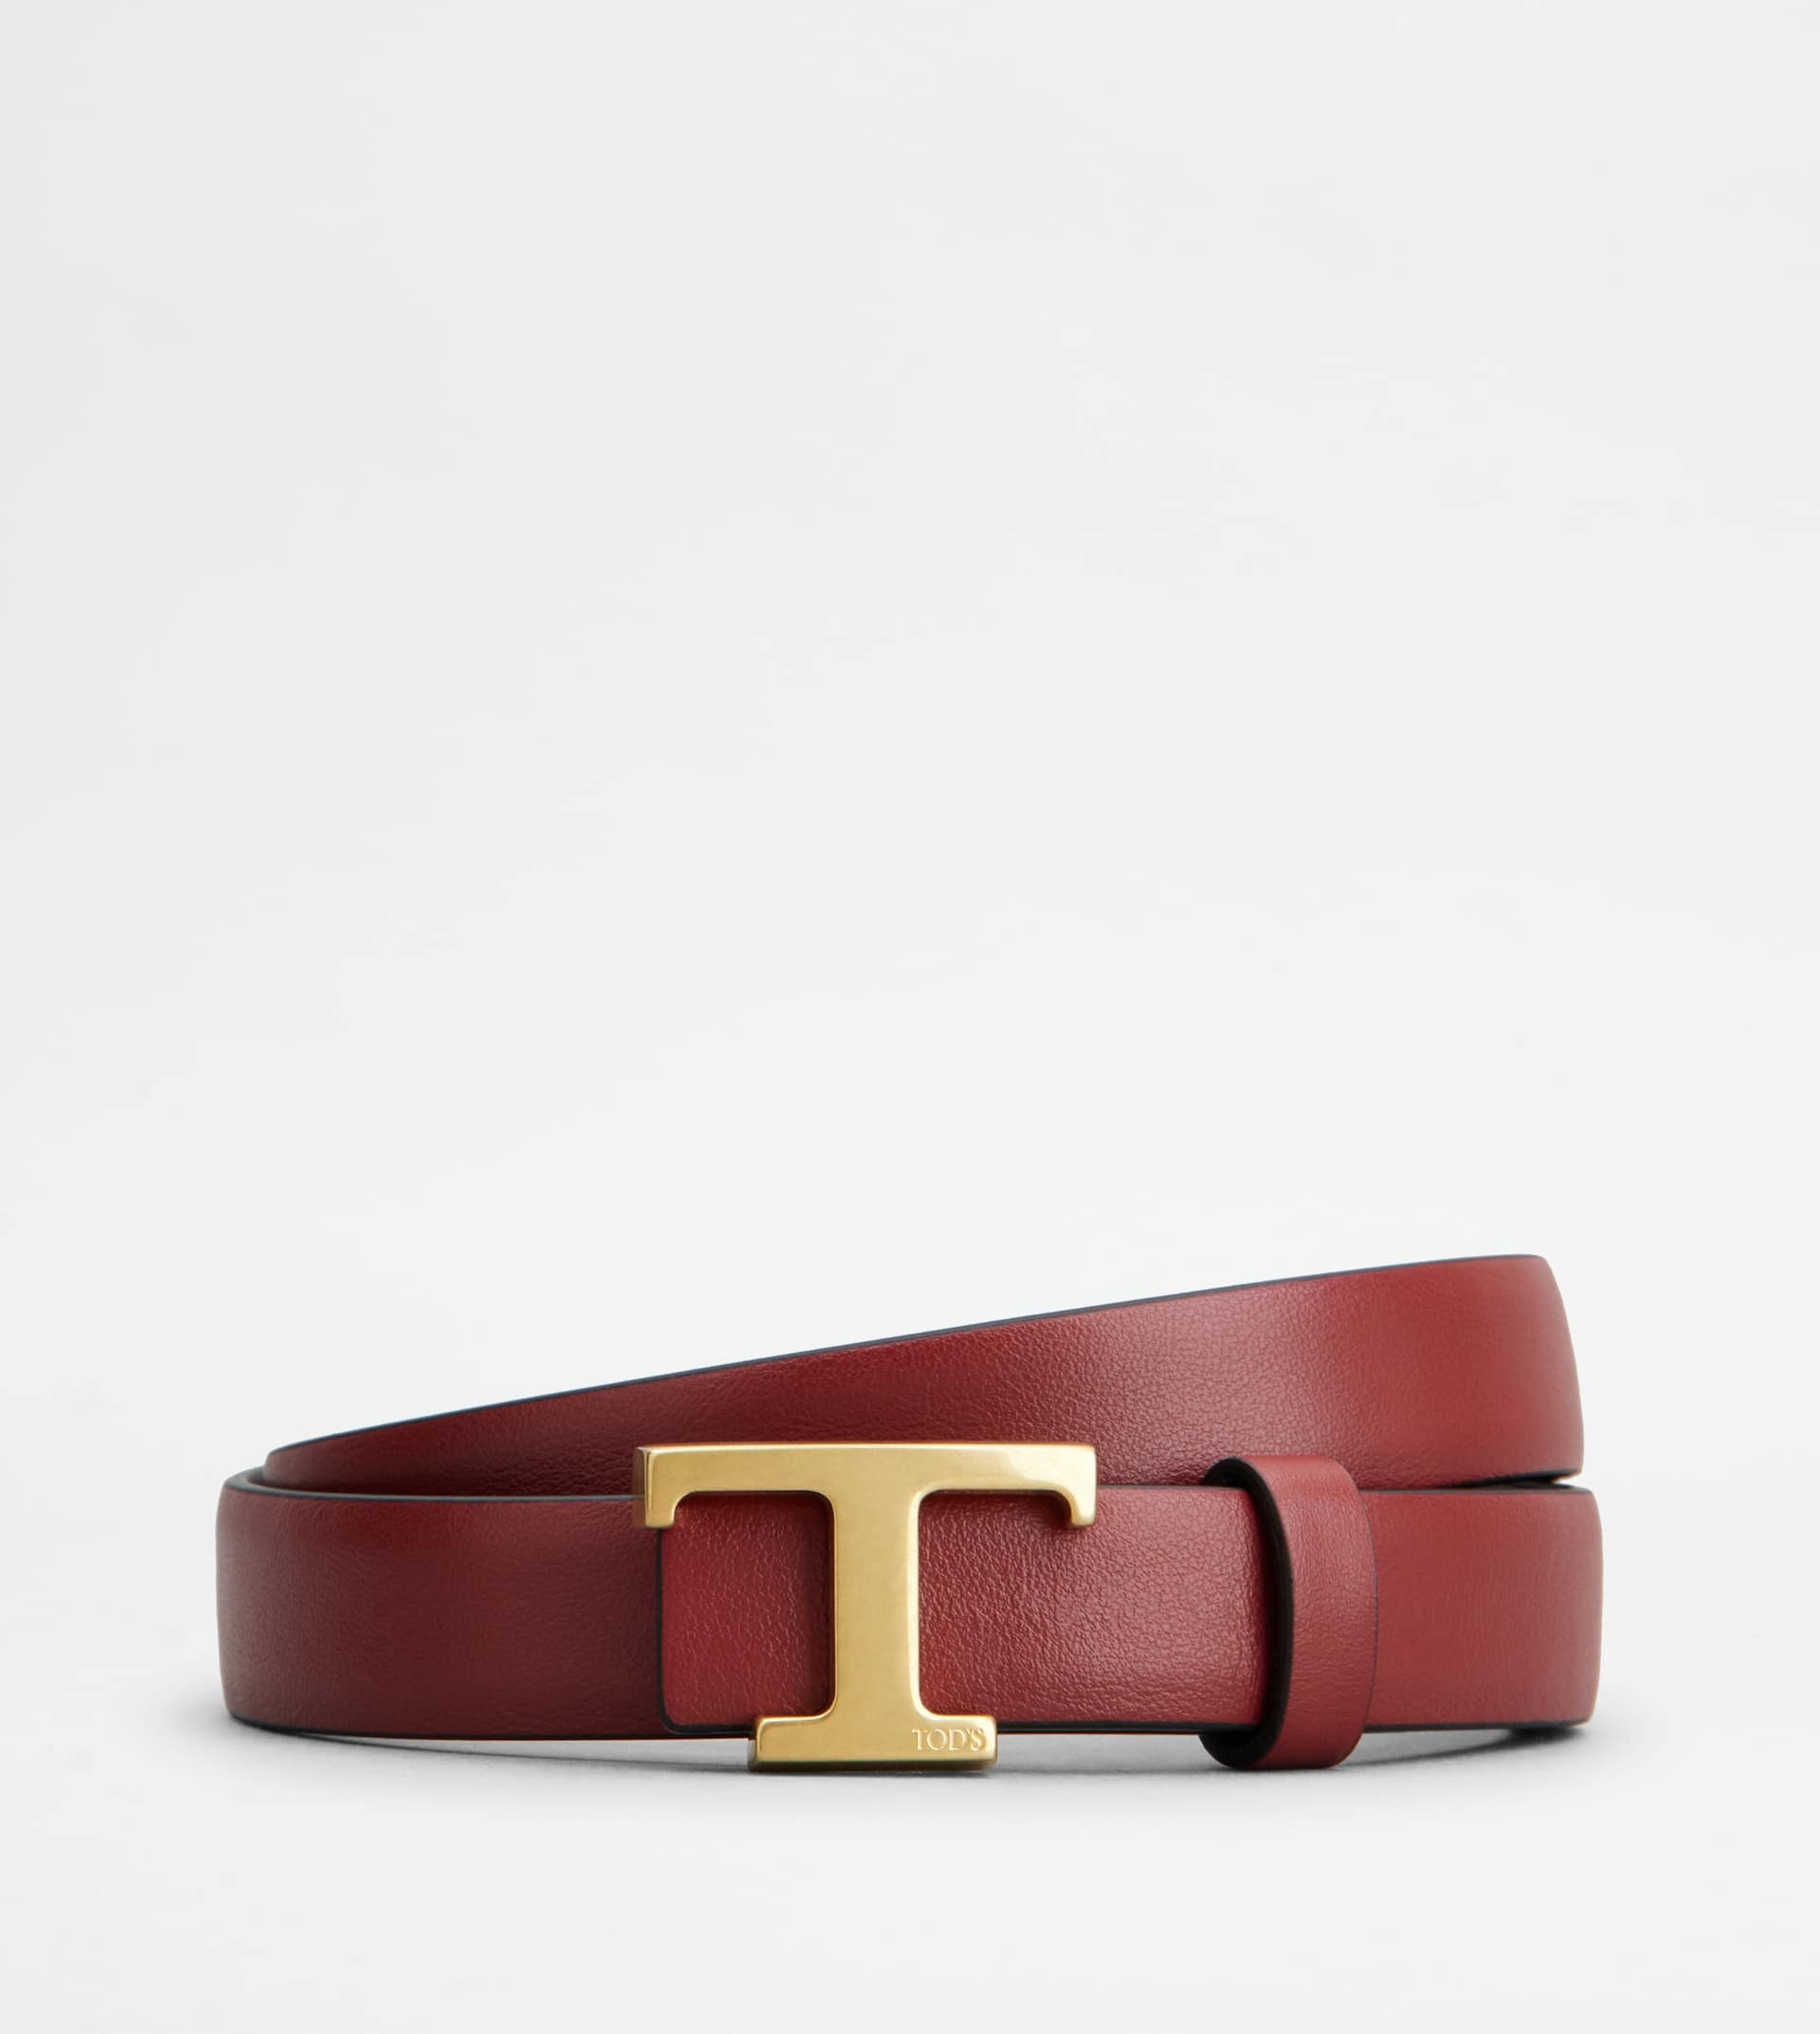 T TIMELESS REVERSIBLE BELT IN LEATHER - BLACK, RED - 2